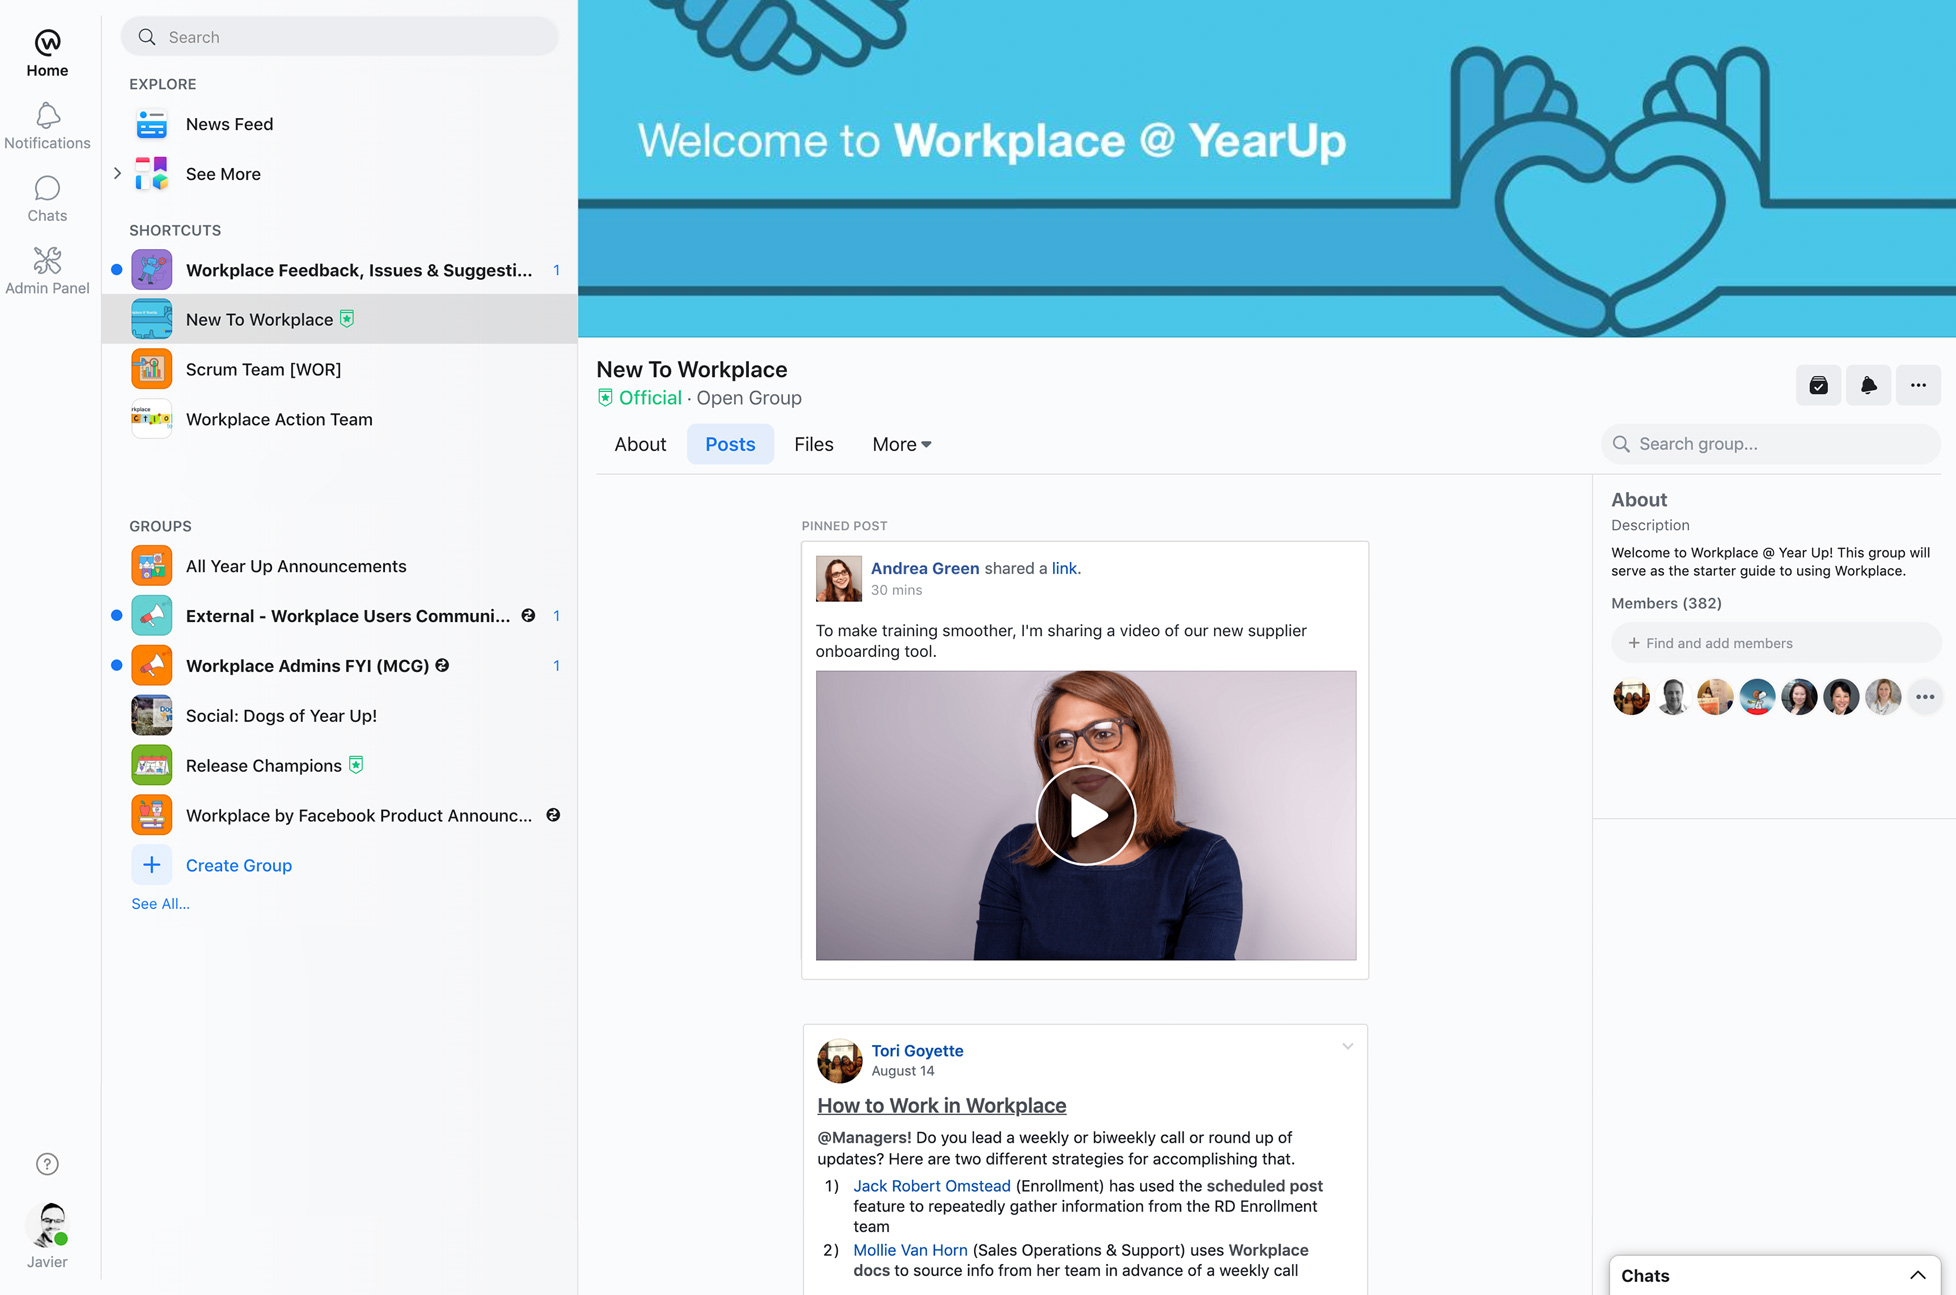 The Welcome to Workplace group, created to support employees adoption and use of the platform.